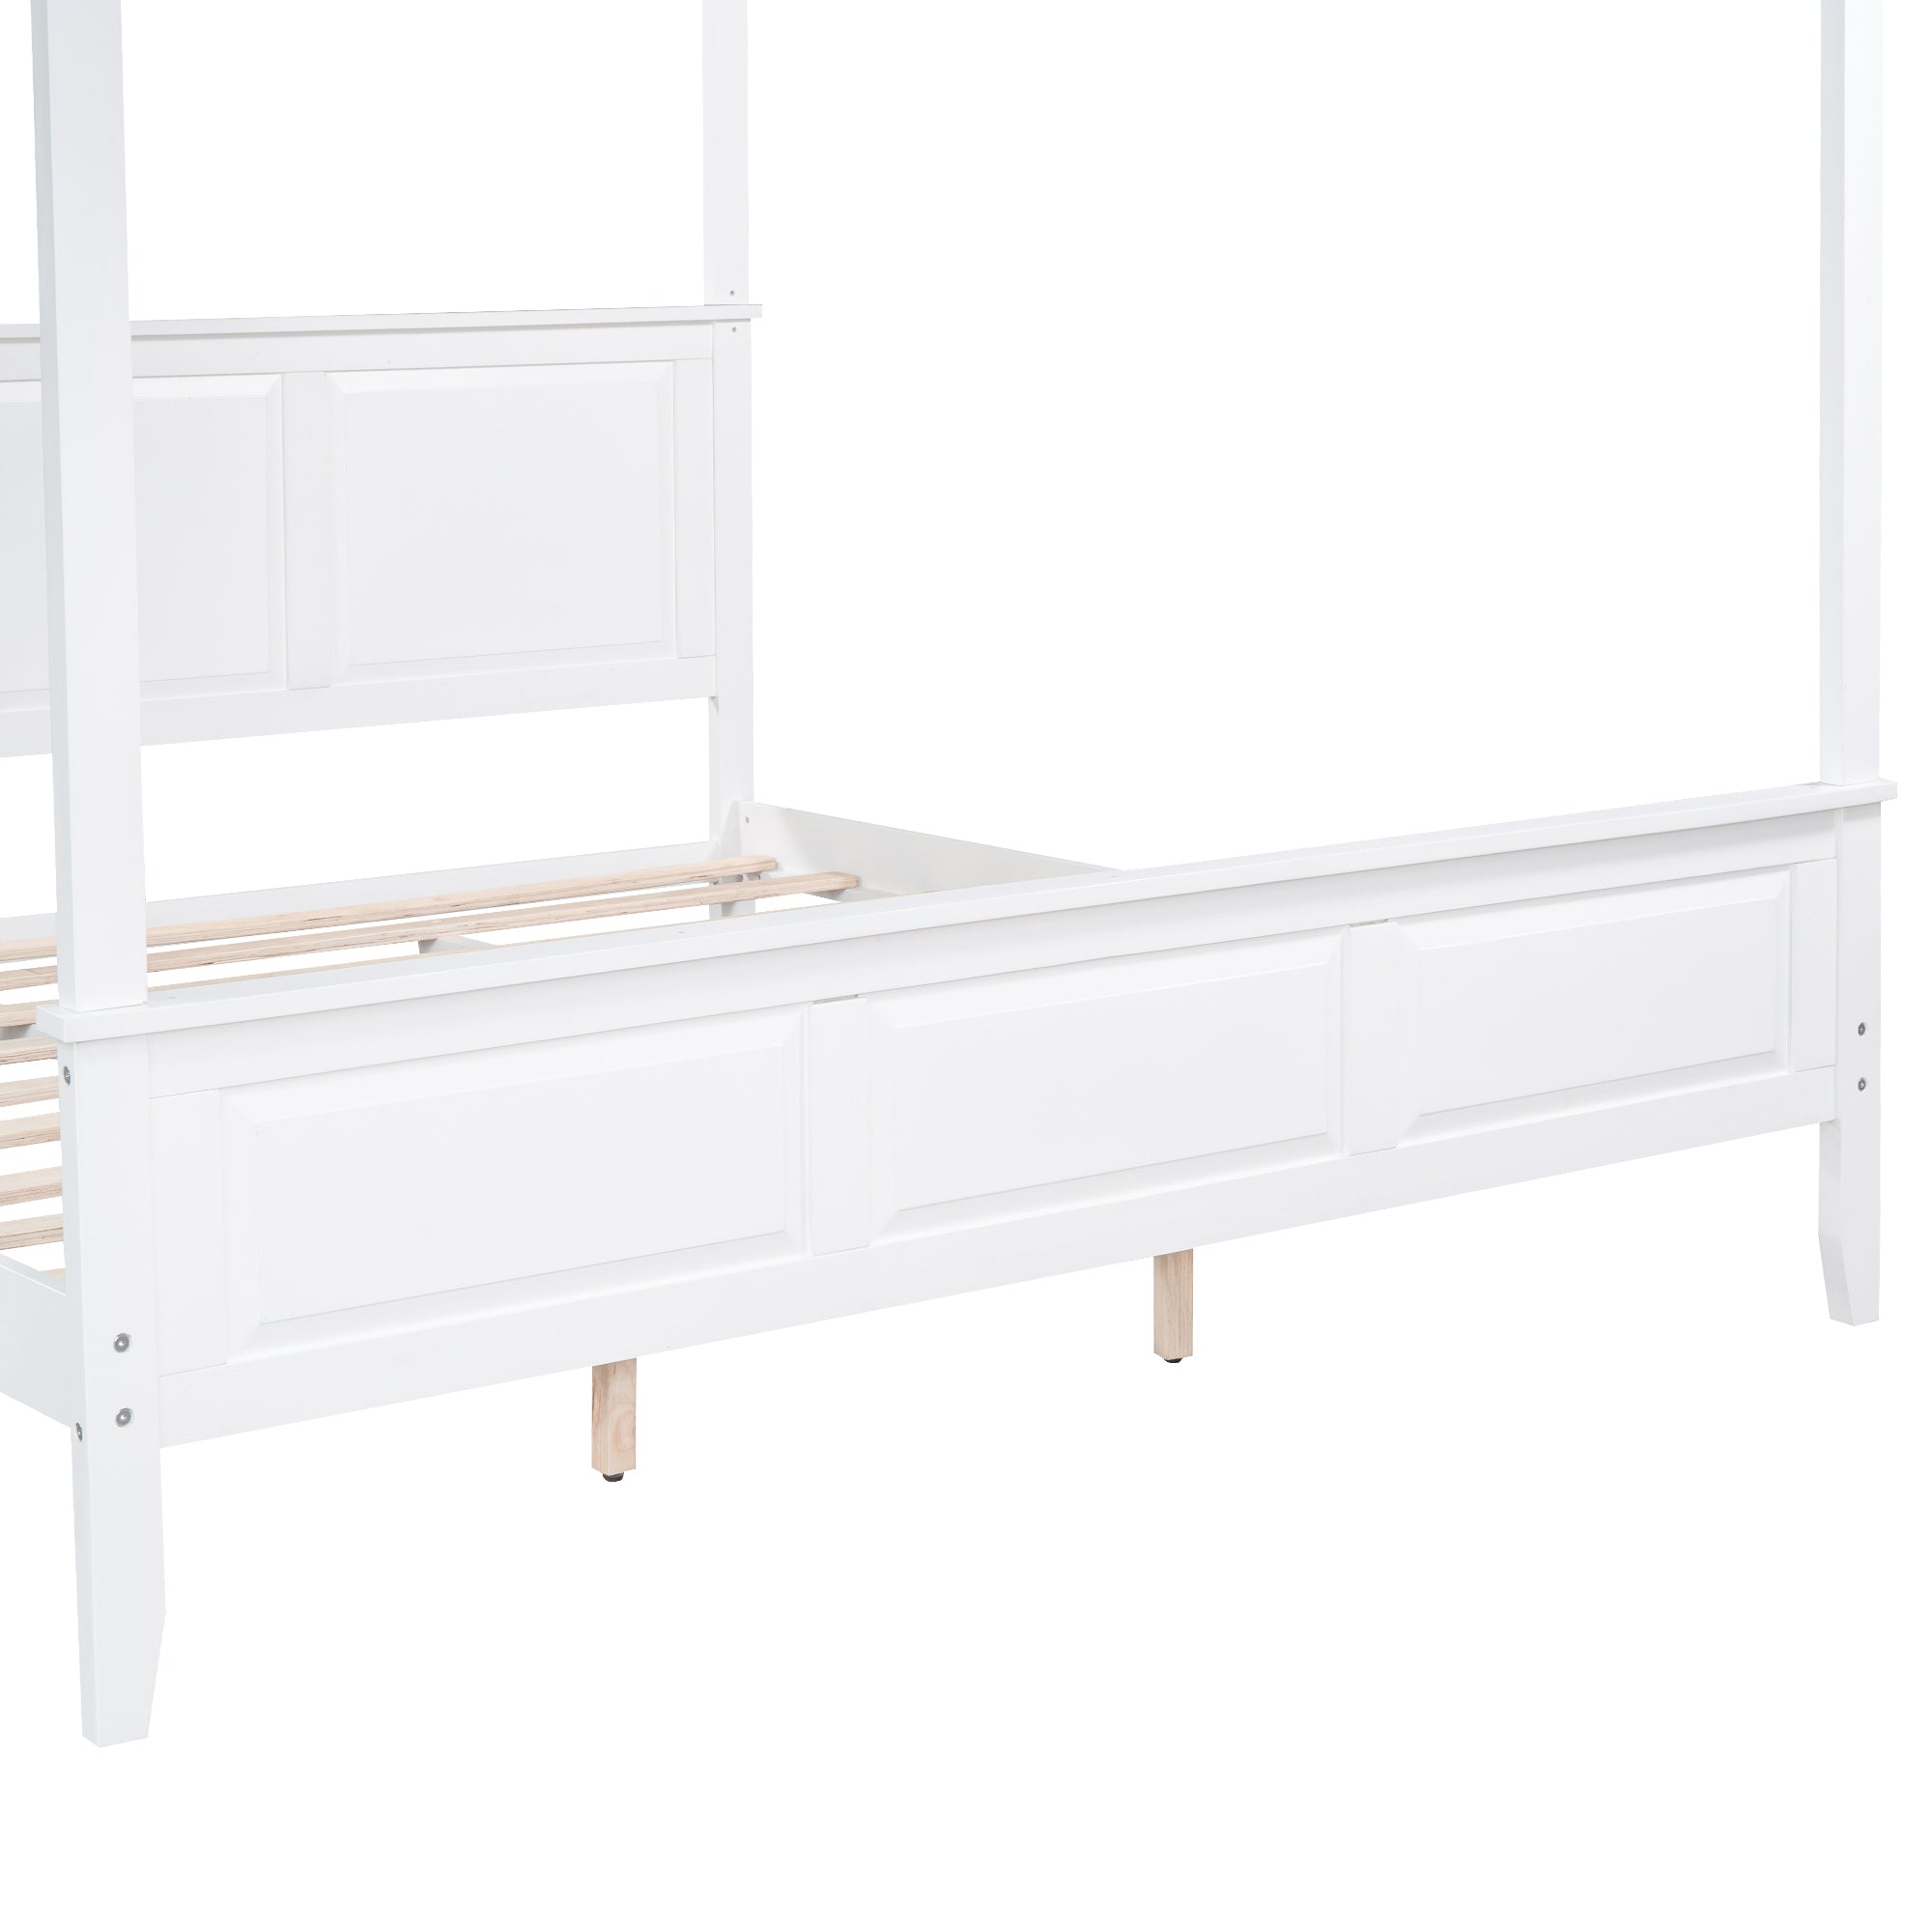 King Size Canopy Platform Bed with Headboard and Footboard By: Alabama Beds